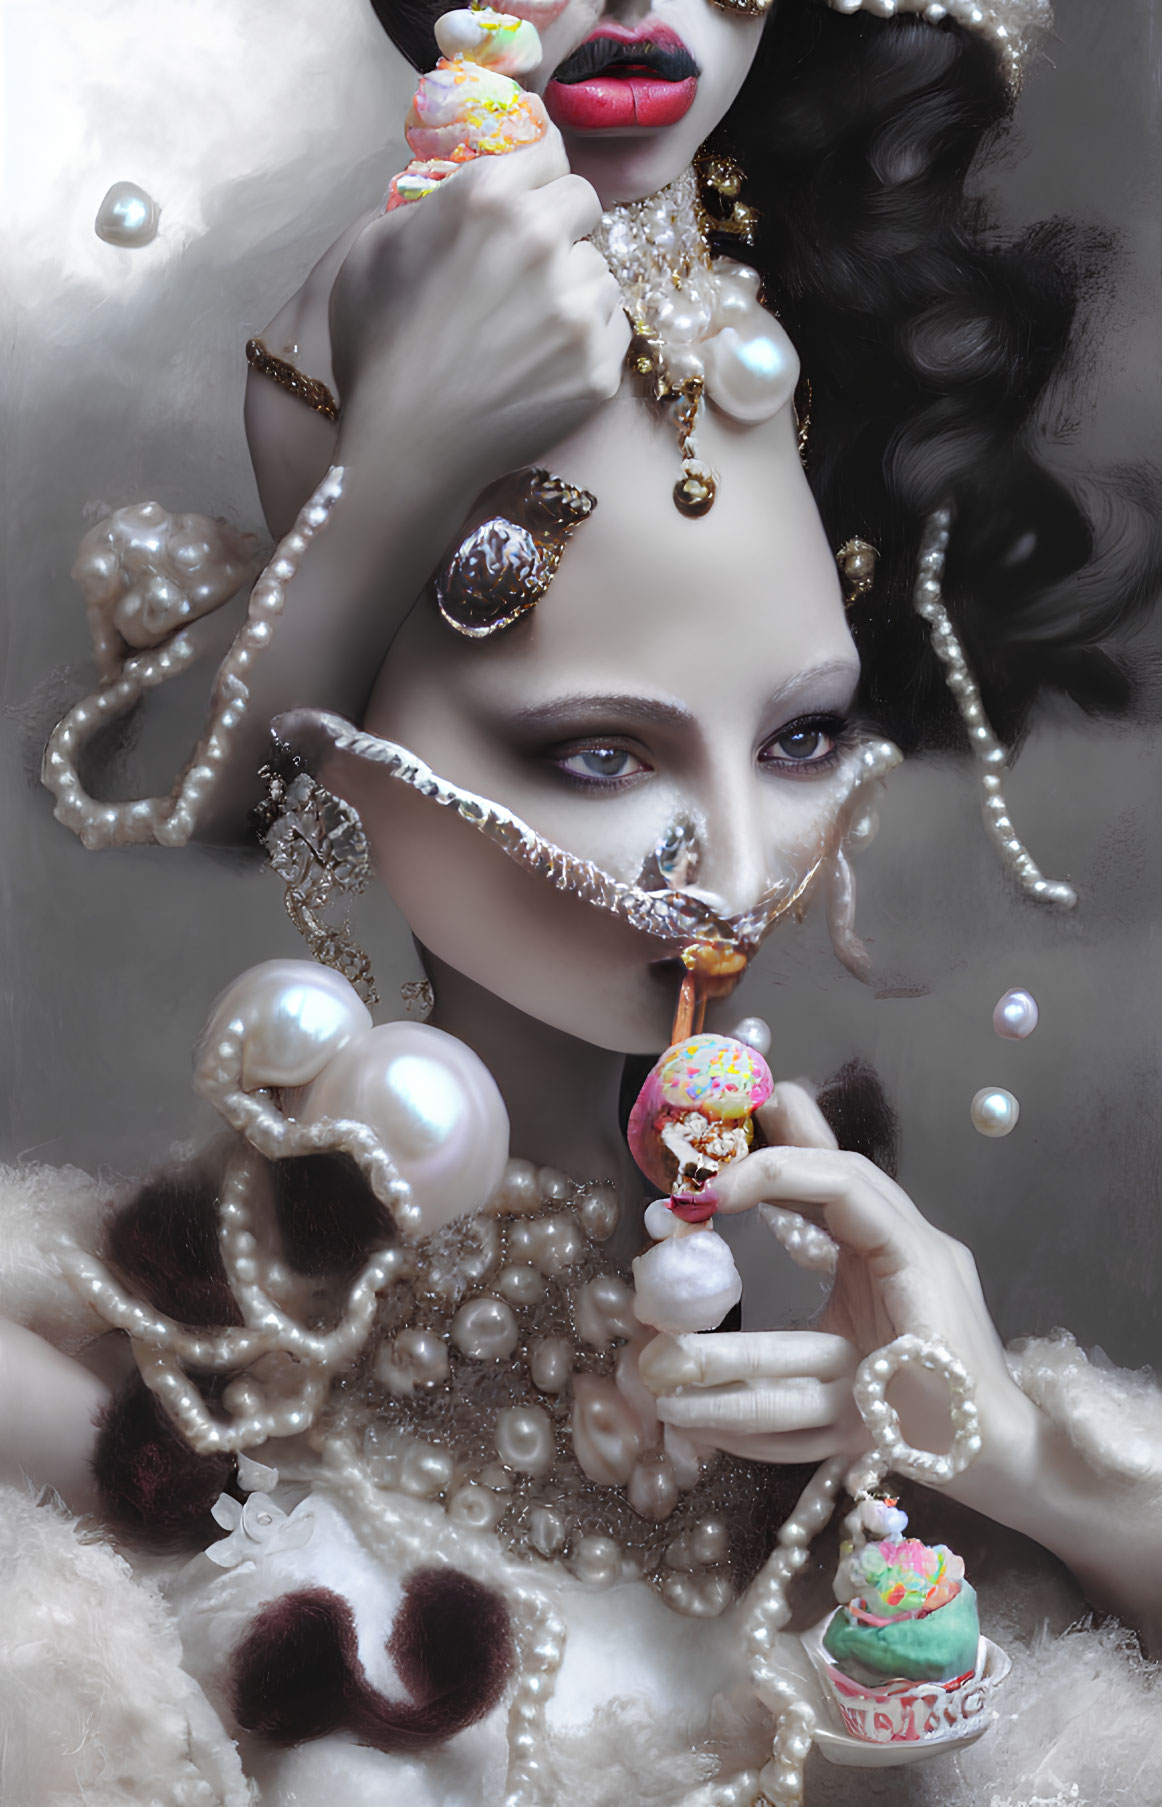 Extravagant portrait of woman with pearls, cupcakes, and dark hair in surreal backdrop